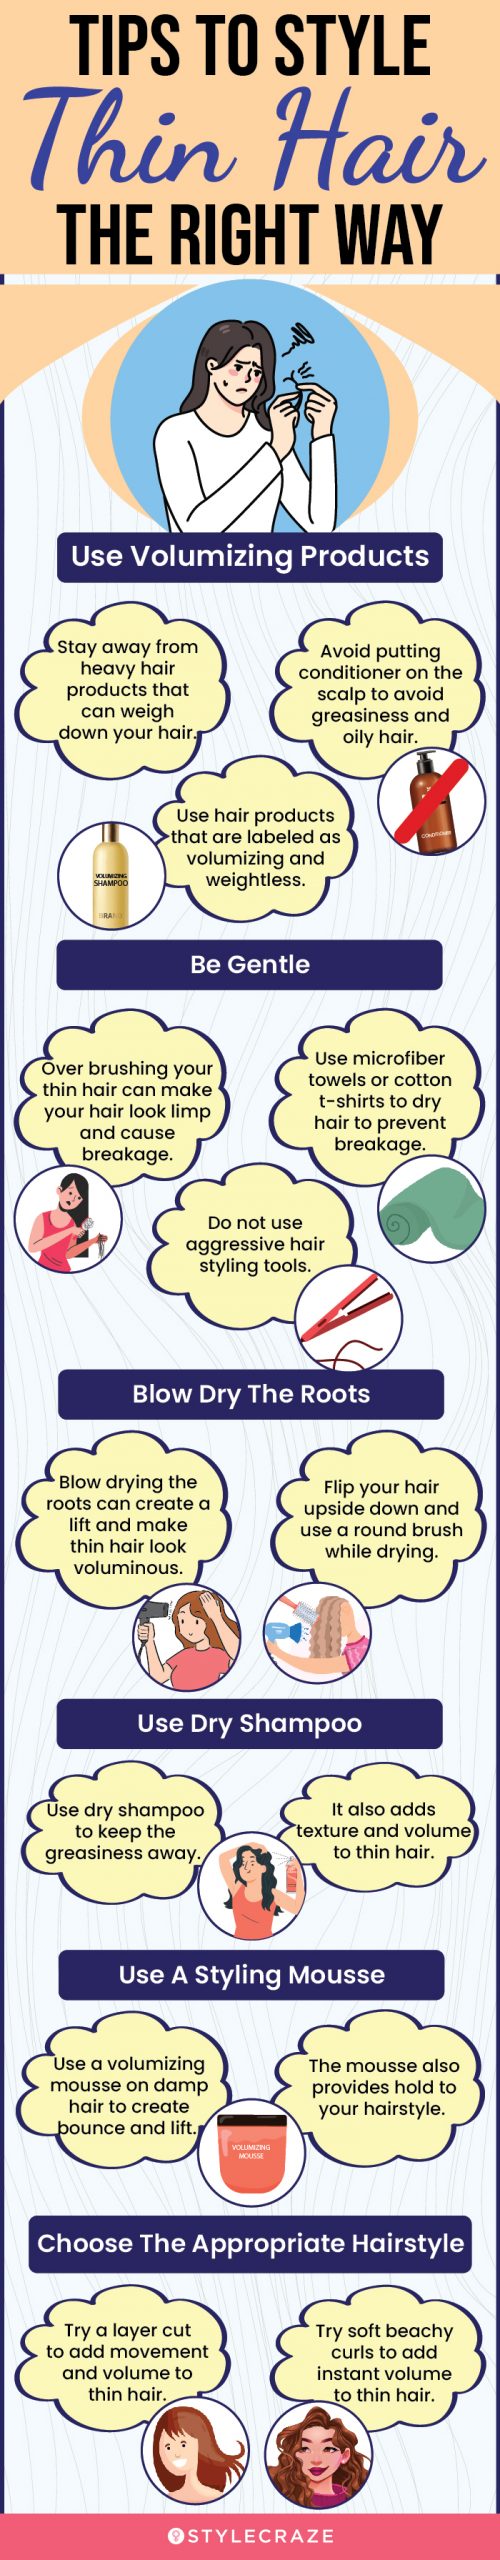 Tips To Style Thin Hair The Right Way (infographic)